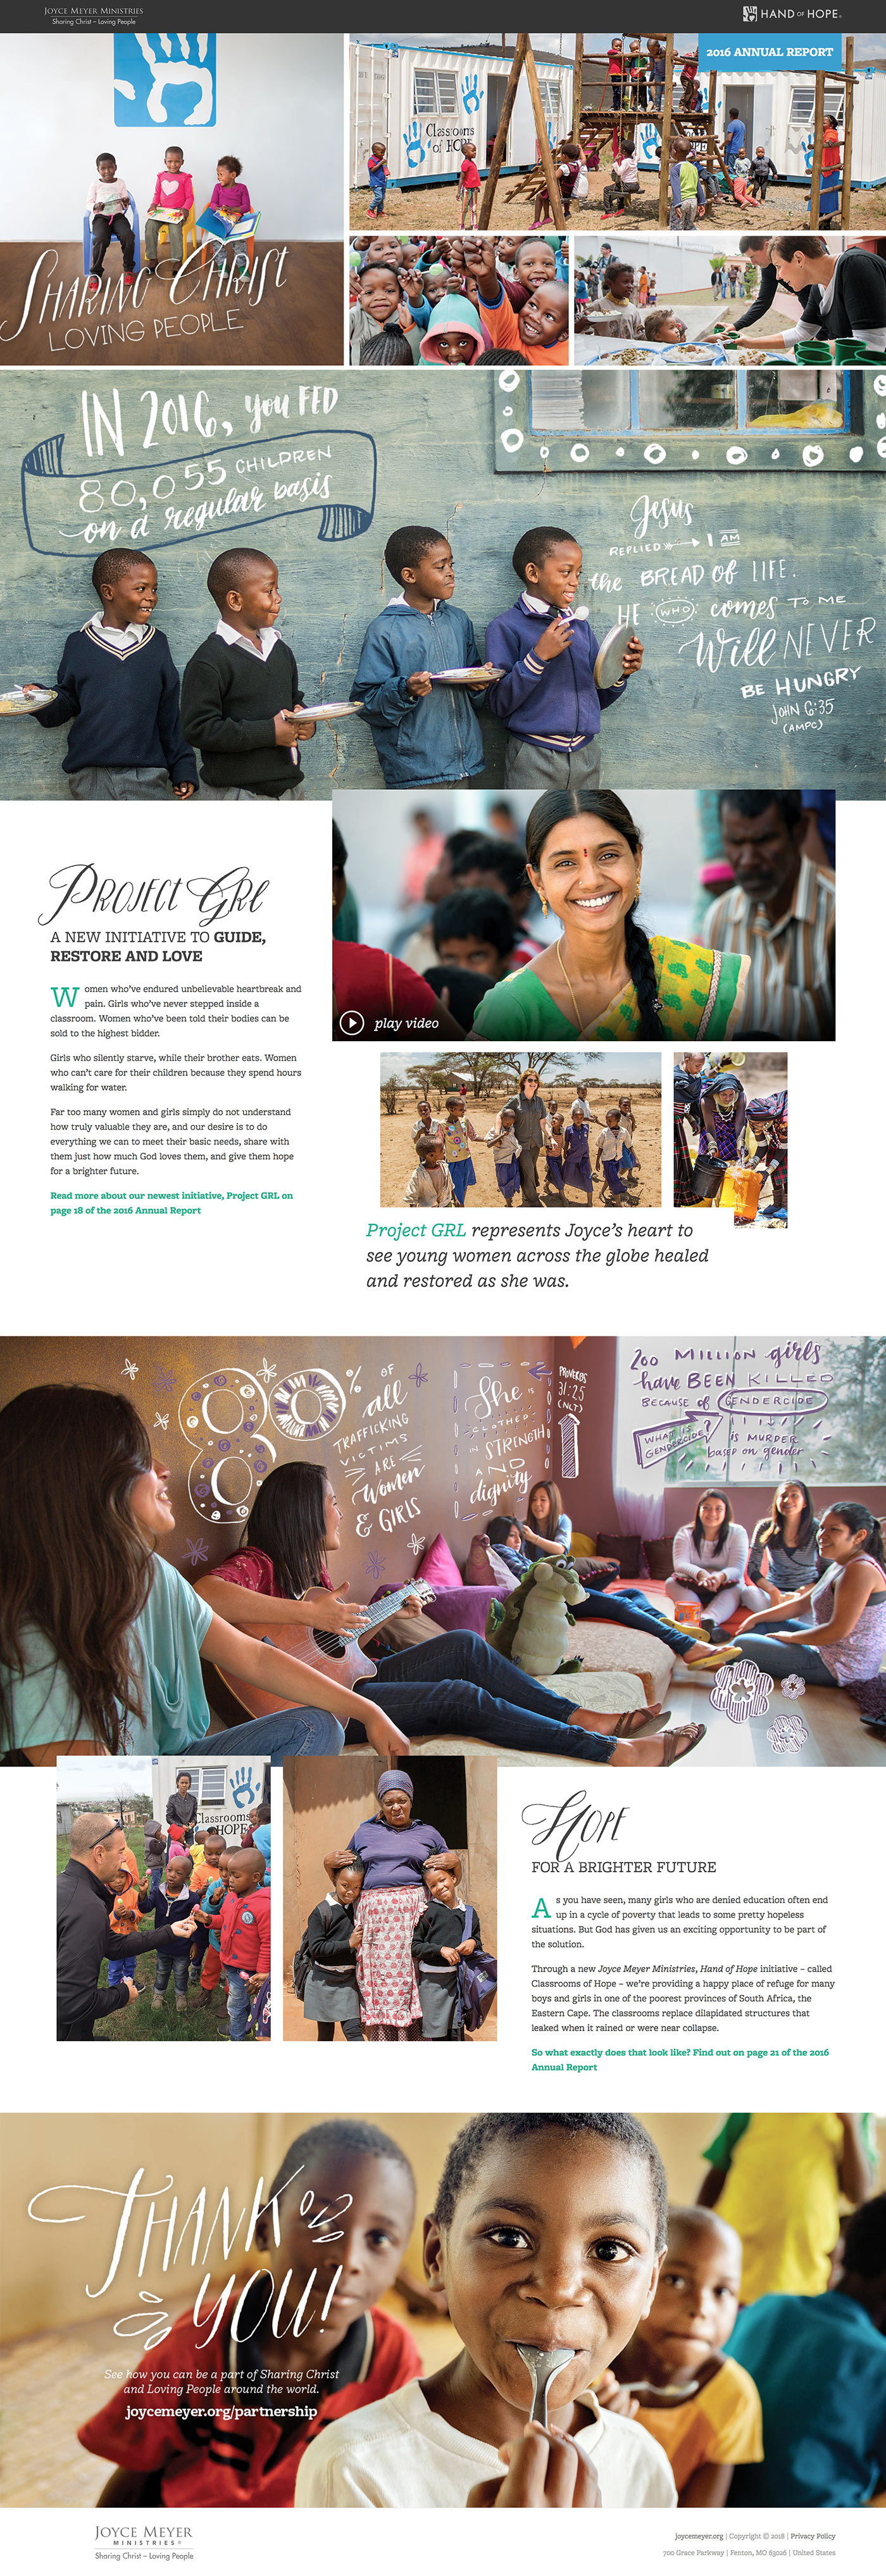 Annual Report 2016 website preview from Joyce Meyer Ministries